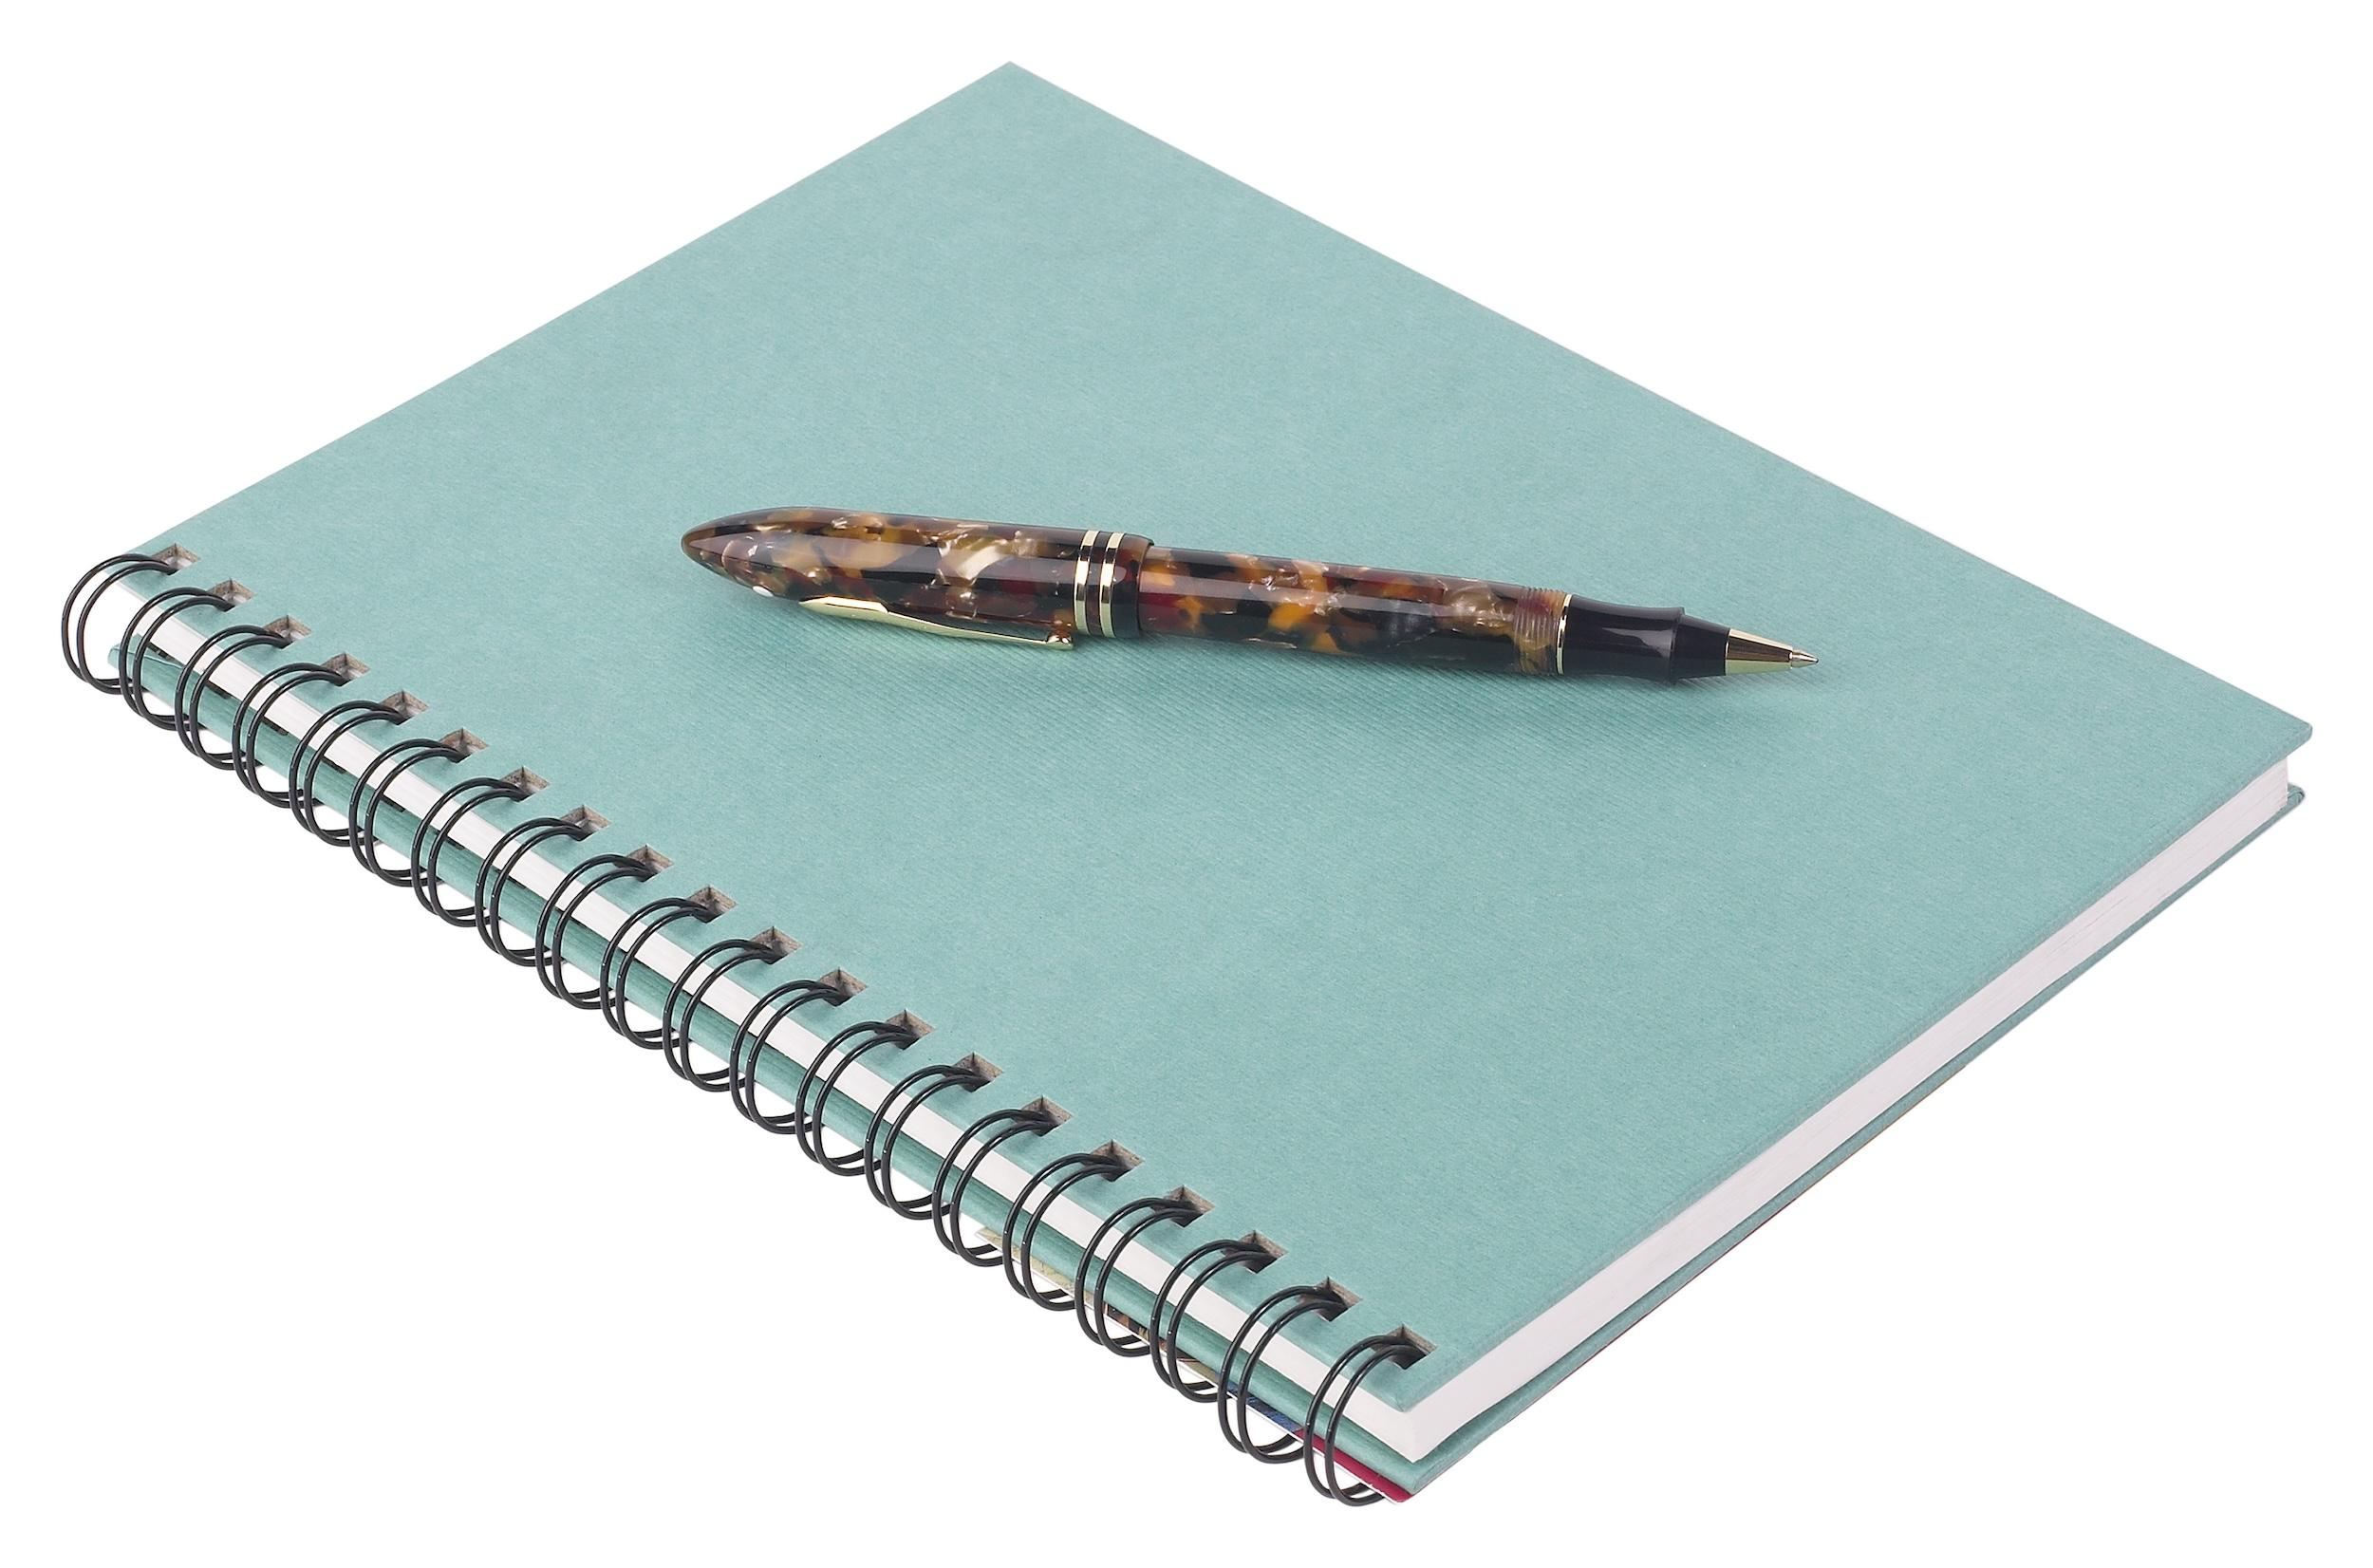 A spiral hardcover notebook in turquoise with pen